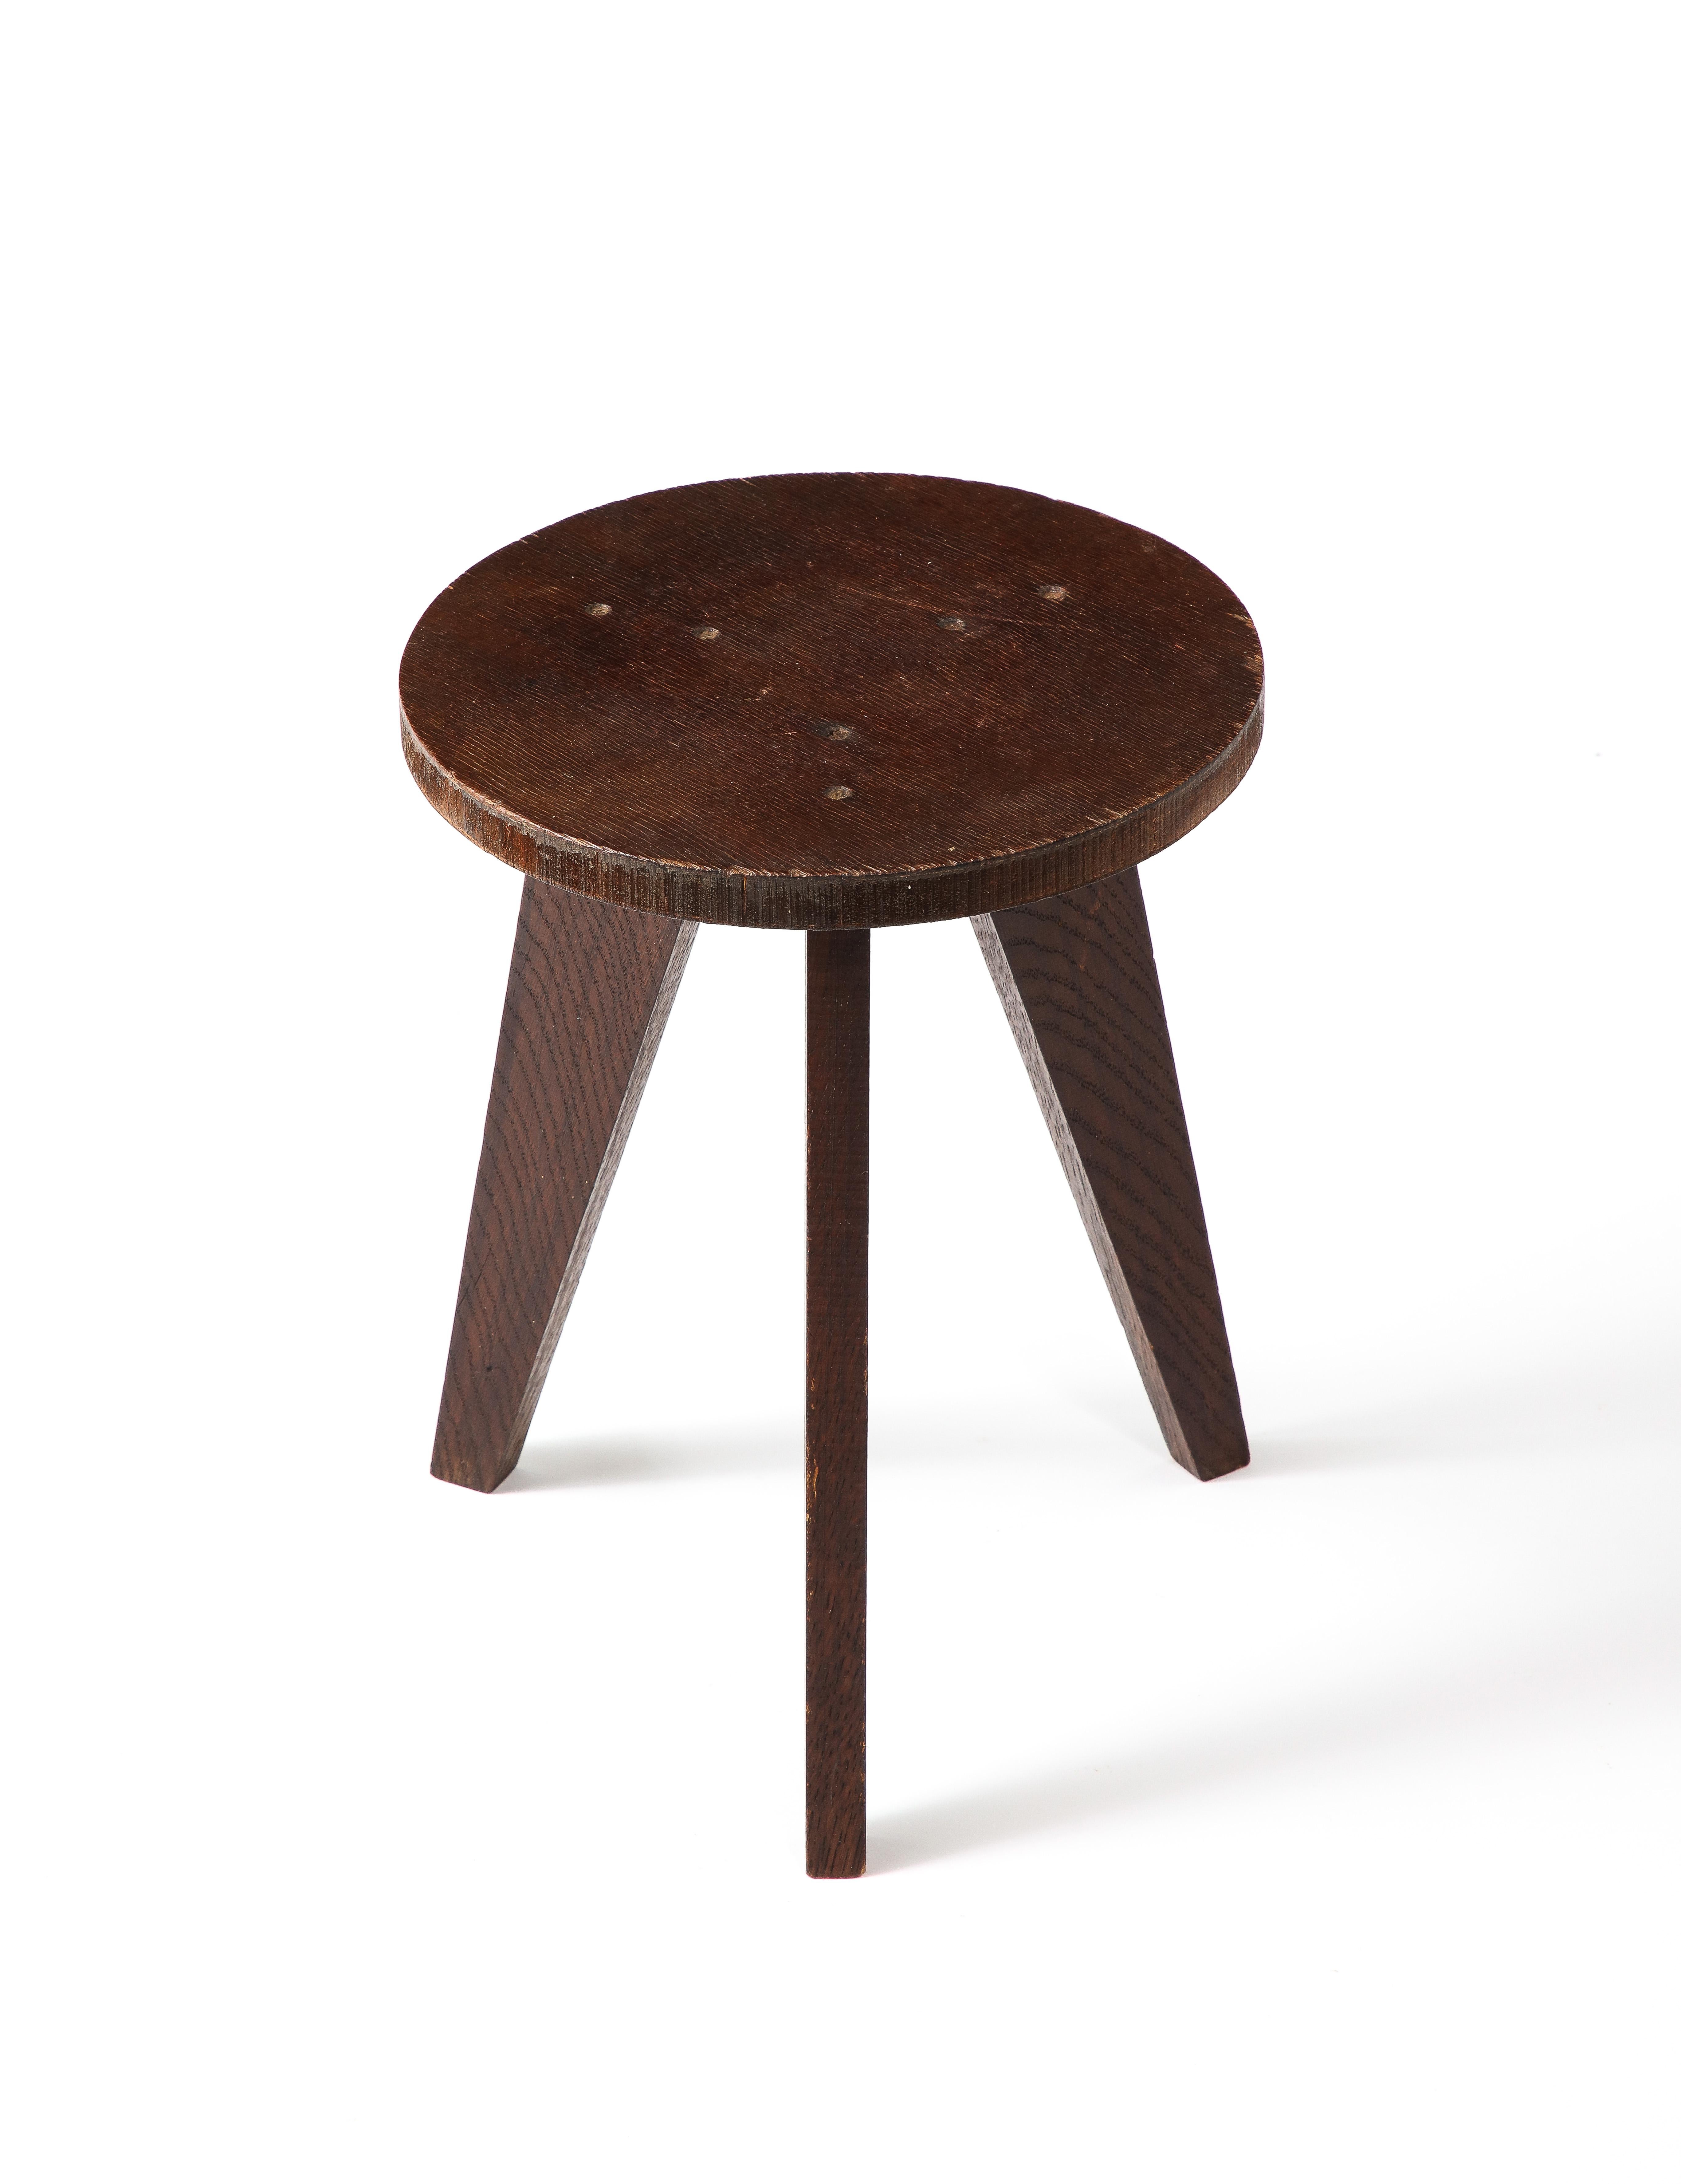 Dark Oak Stool in the Style of Hervé Bayley, France 1950s For Sale 8